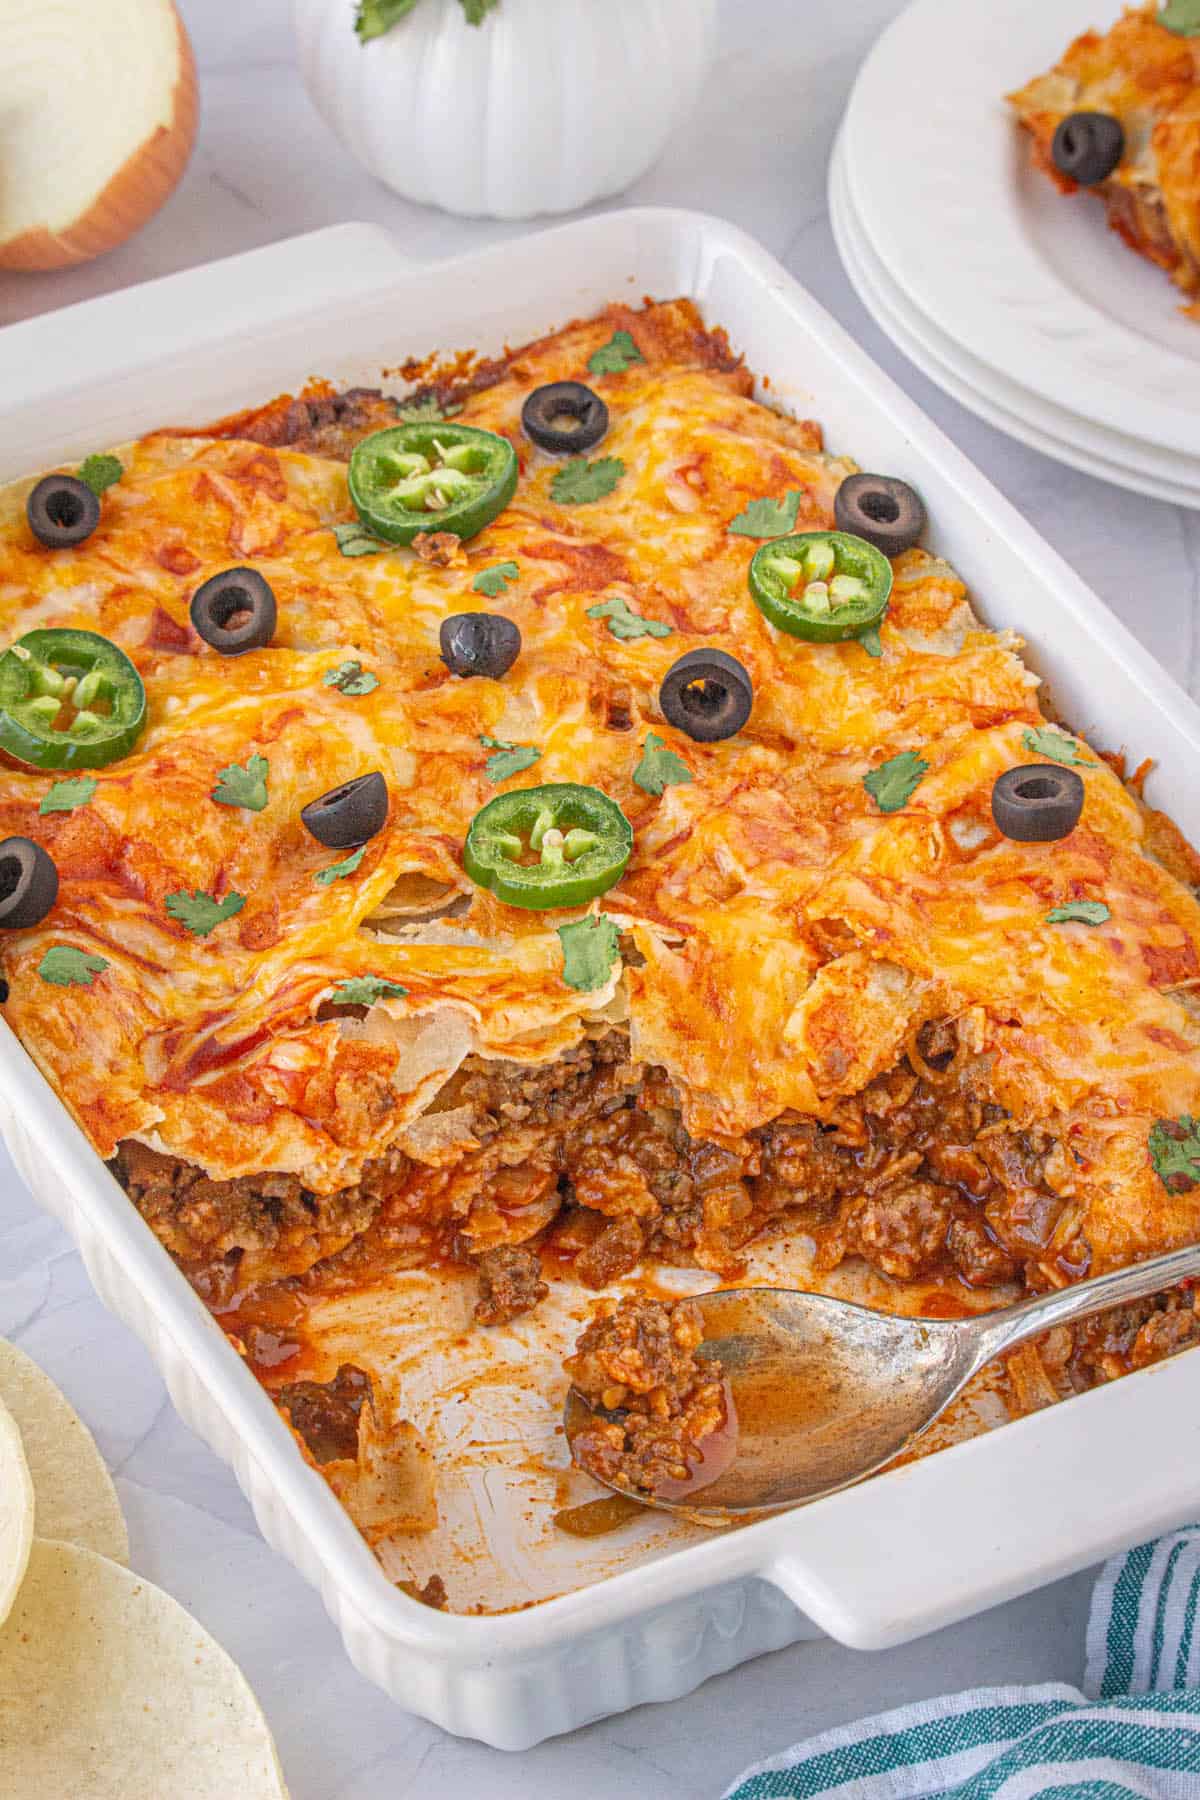 Ground beef enchilada casserole in a baking dish with a serving spoon.